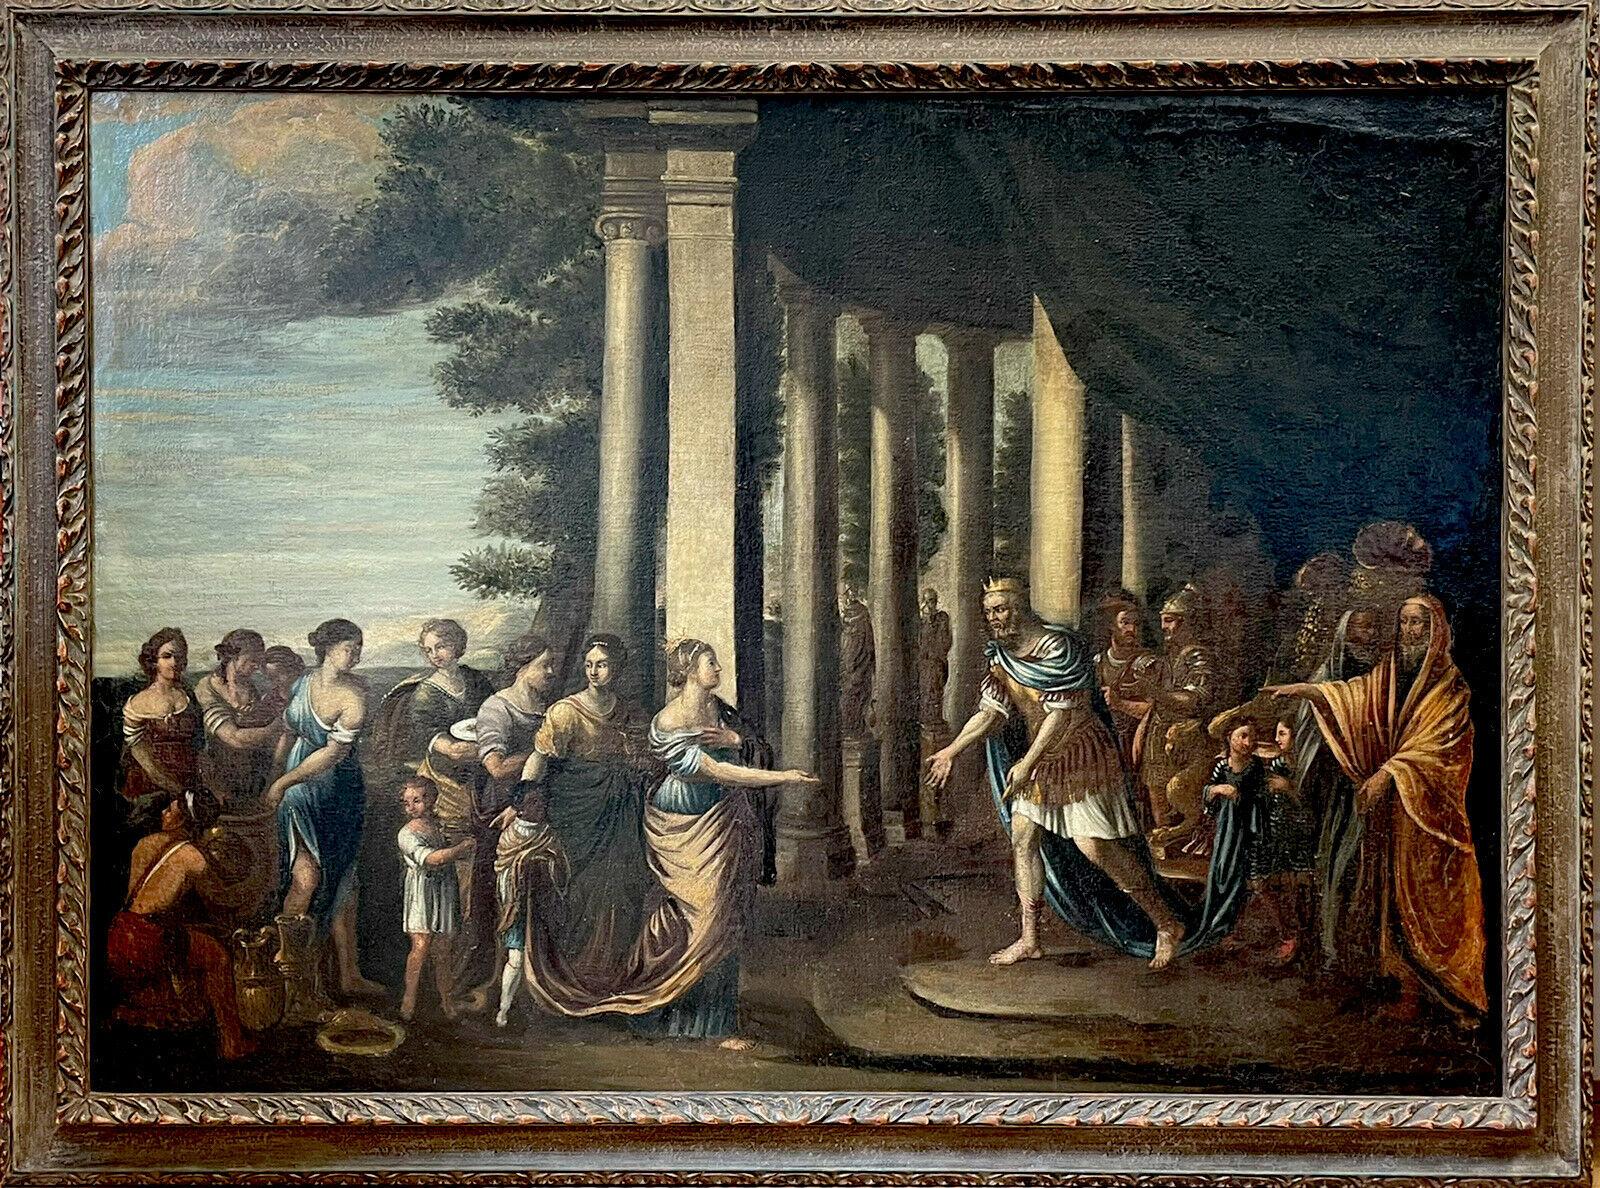 Unknown Figurative Painting - HUGE 17thC ITALIAN OLD MASTER OIL PAINTING - KING & COURT FIGURES ROMAN BUILDING